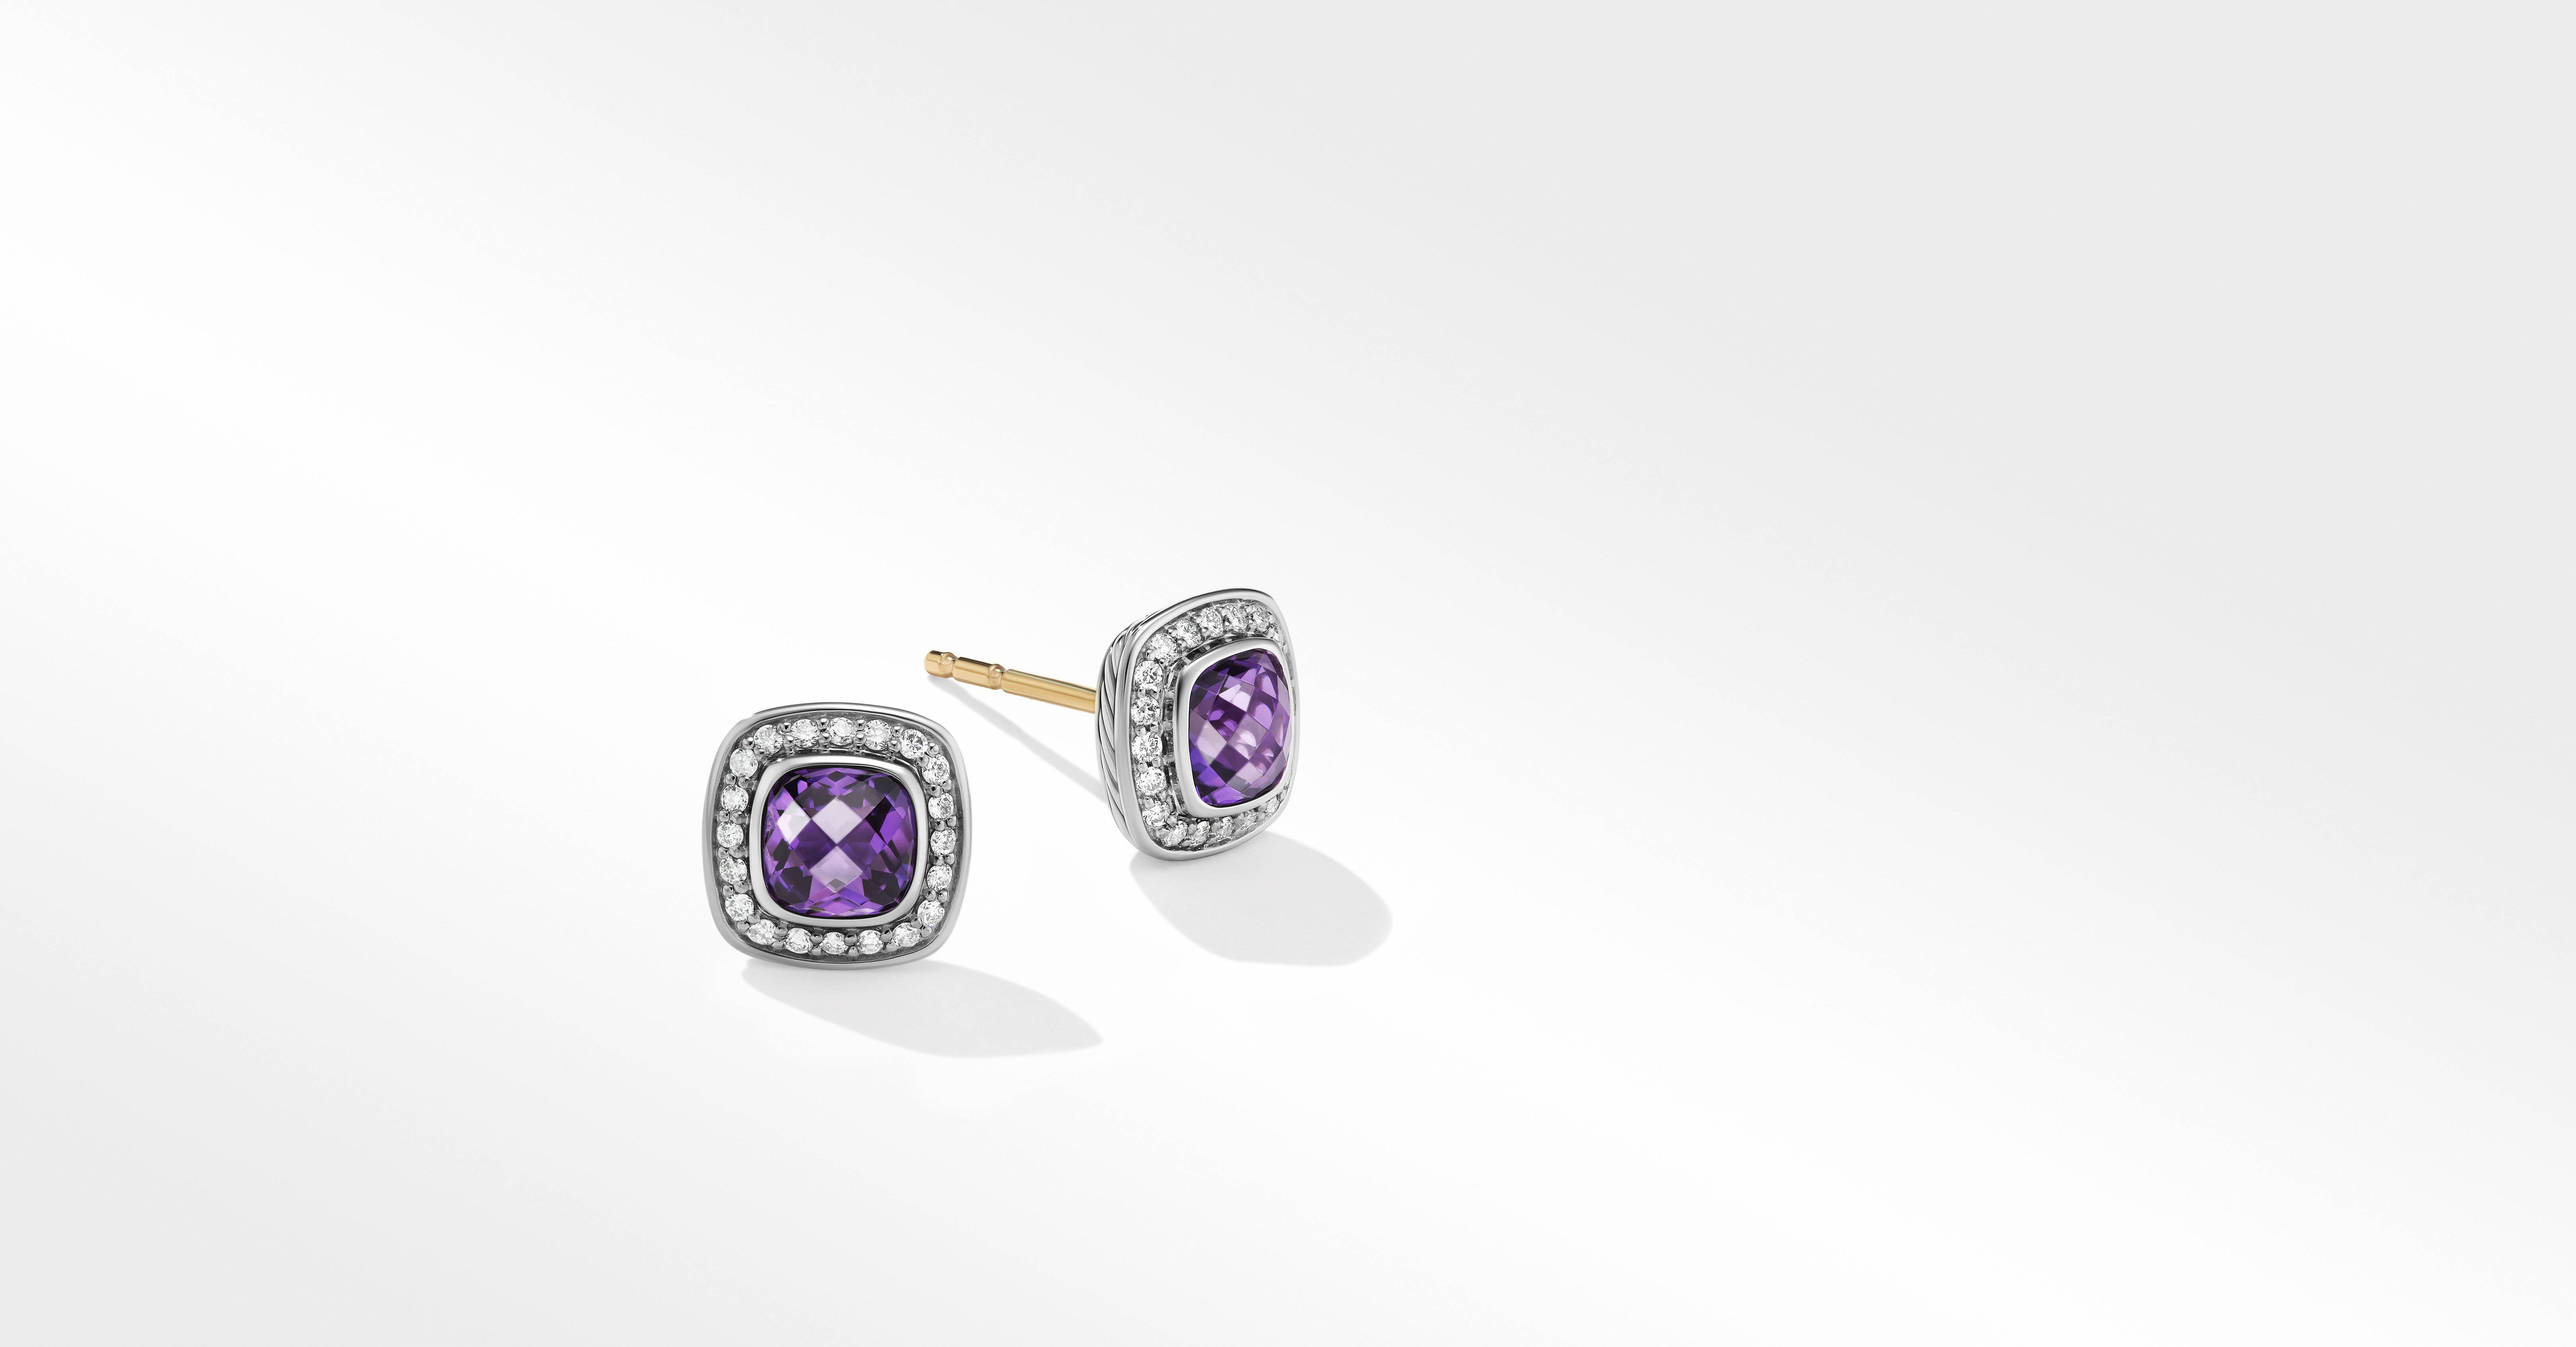 Petite Albion® Stud Earrings in Sterling Silver with Amethyst and